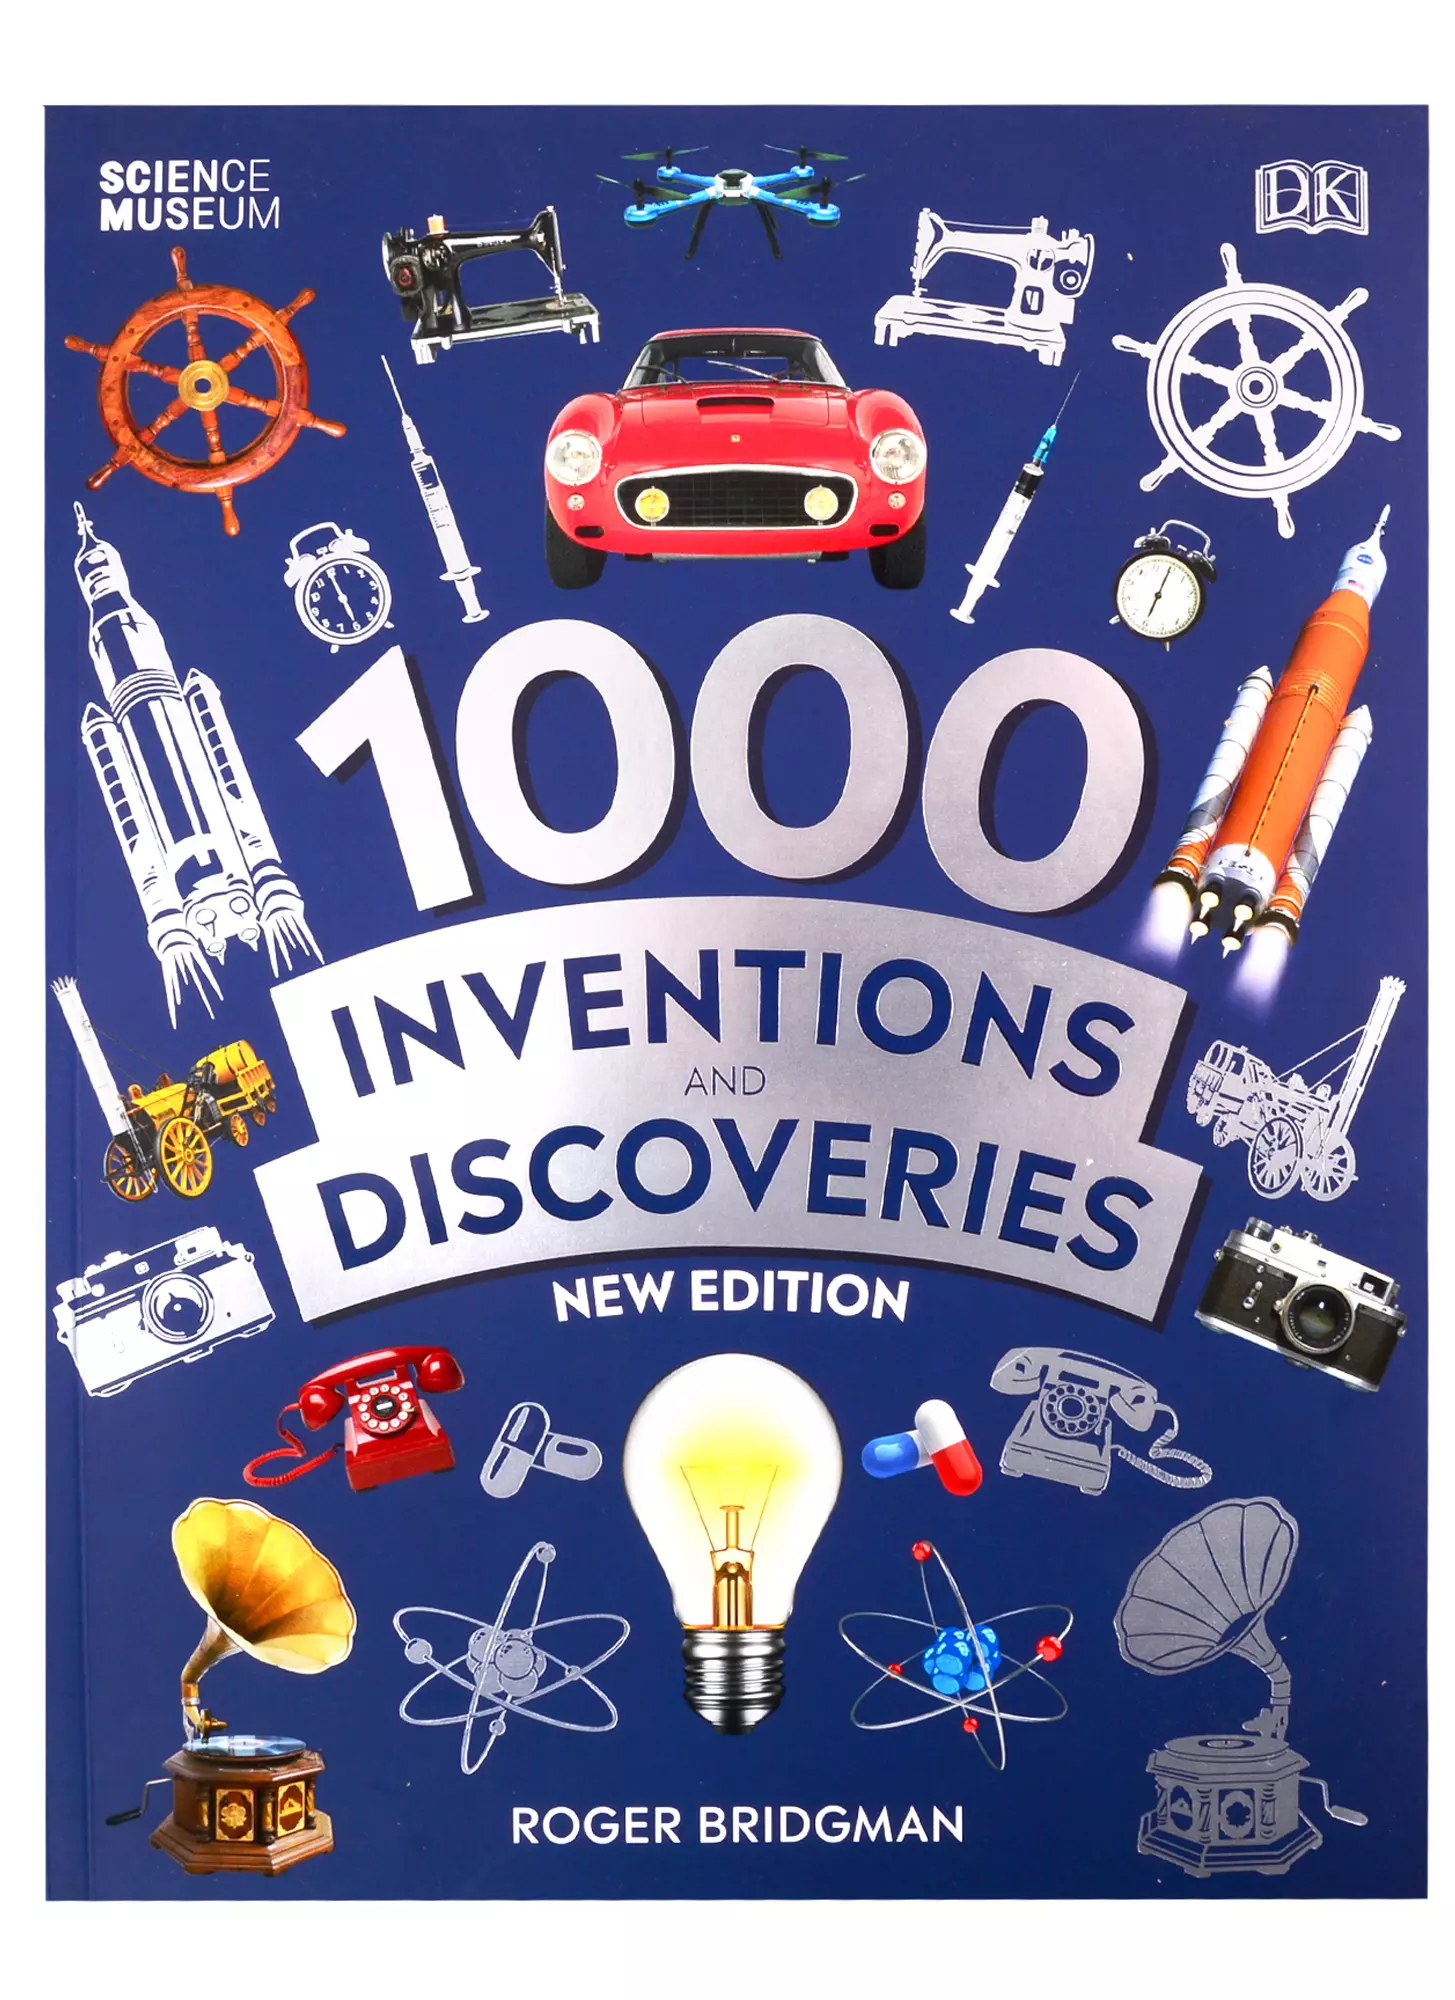  - 1000 Inventions and Discoveries